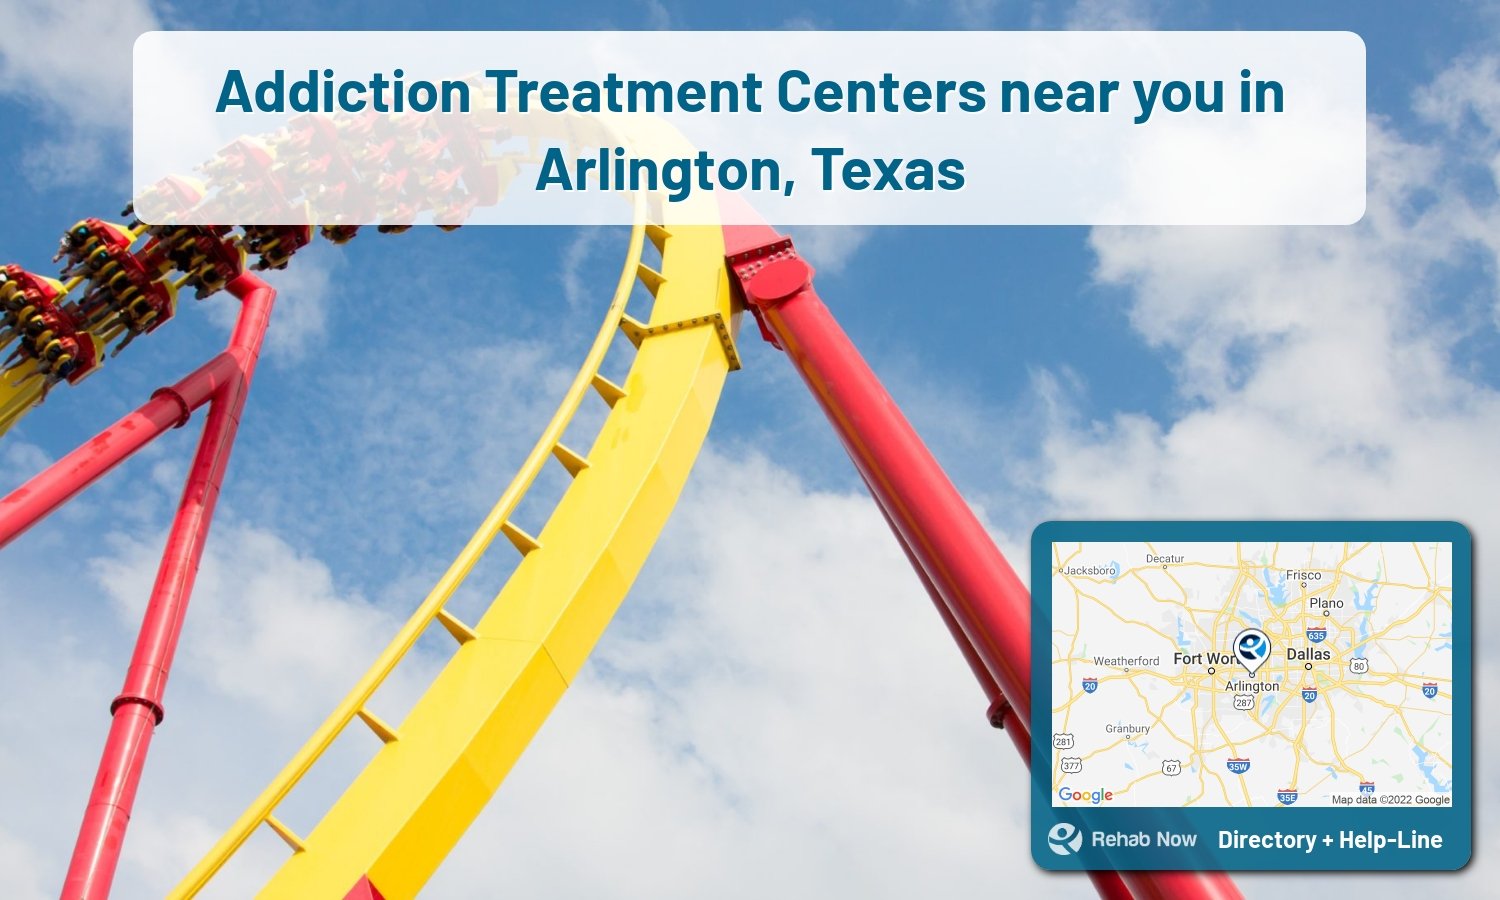 Arlington, TX Treatment Centers. Find drug rehab in Arlington, Texas, or detox and treatment programs. Get the right help now!